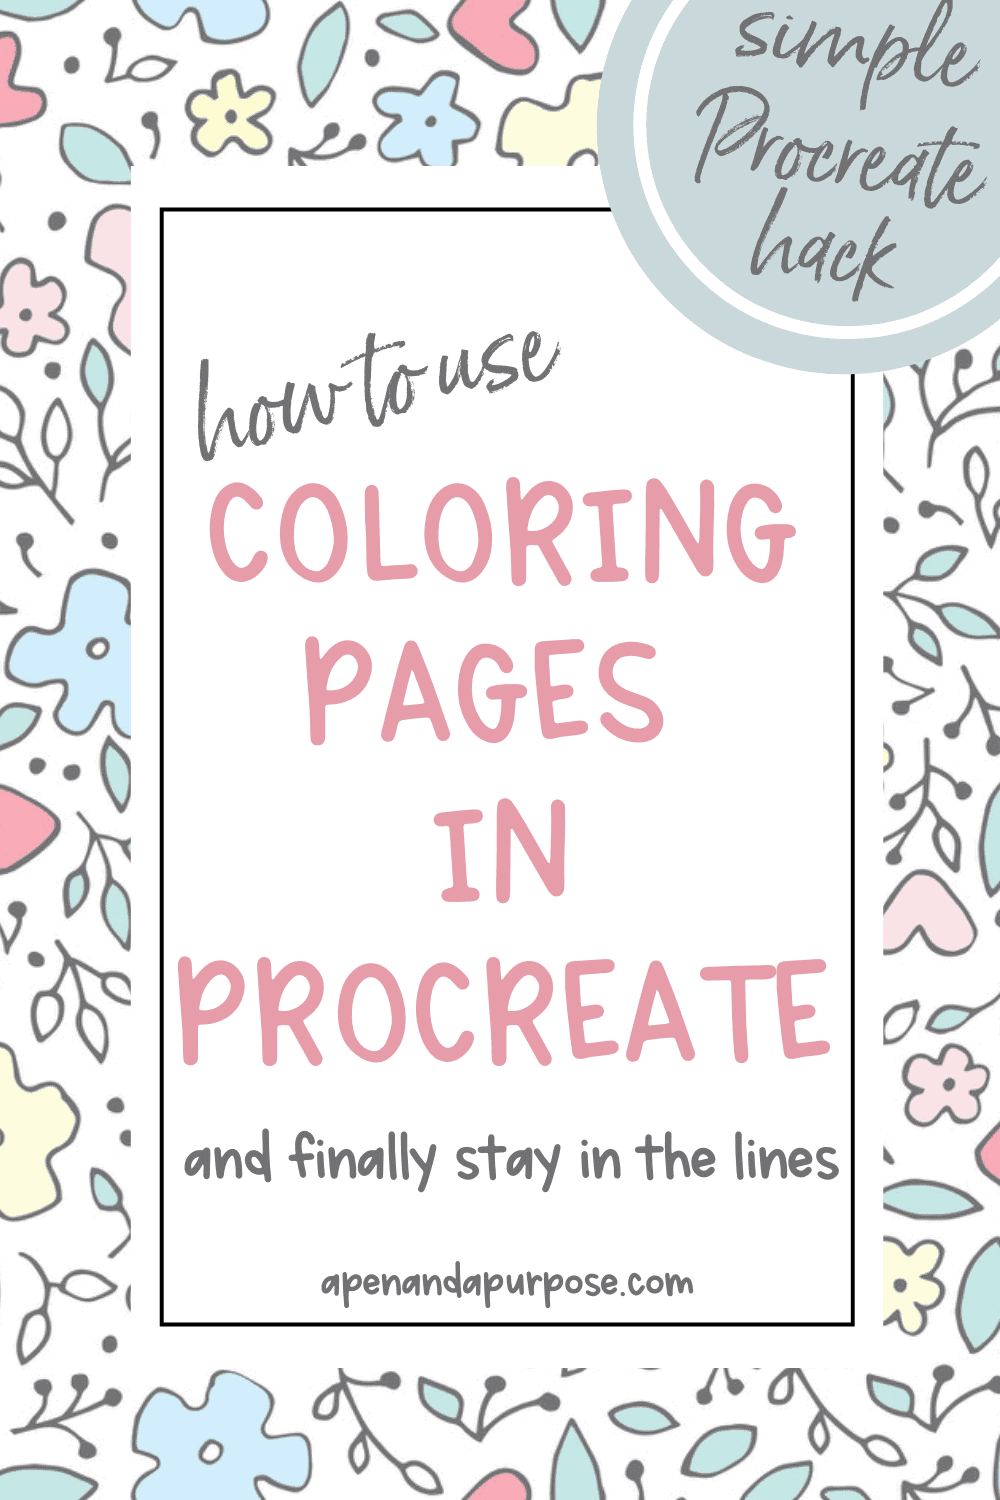 How to color on coloring pages in procreate a simple procreate tutorial